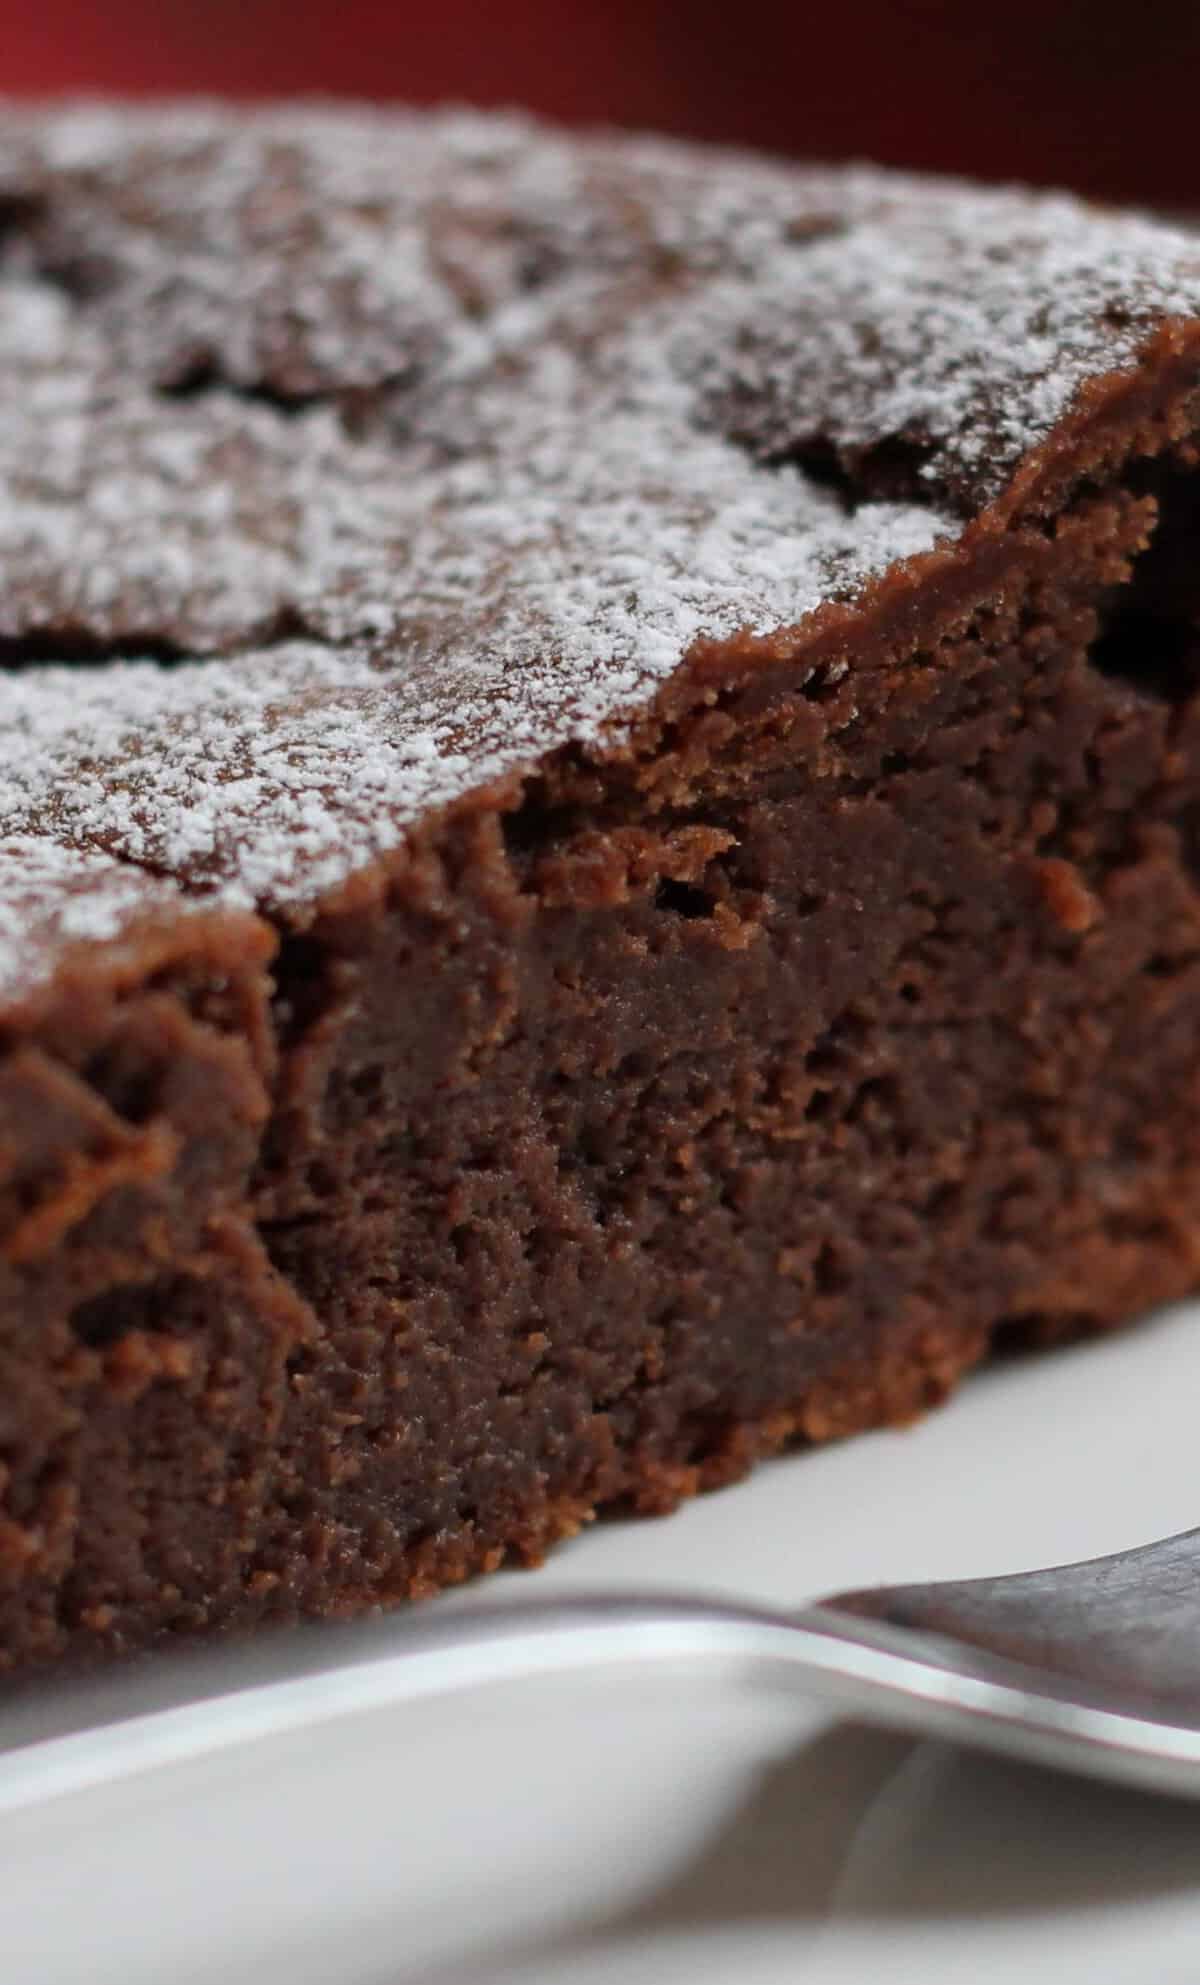  Indulge in a slice of heaven with this Chocolate Chestnut Cake.